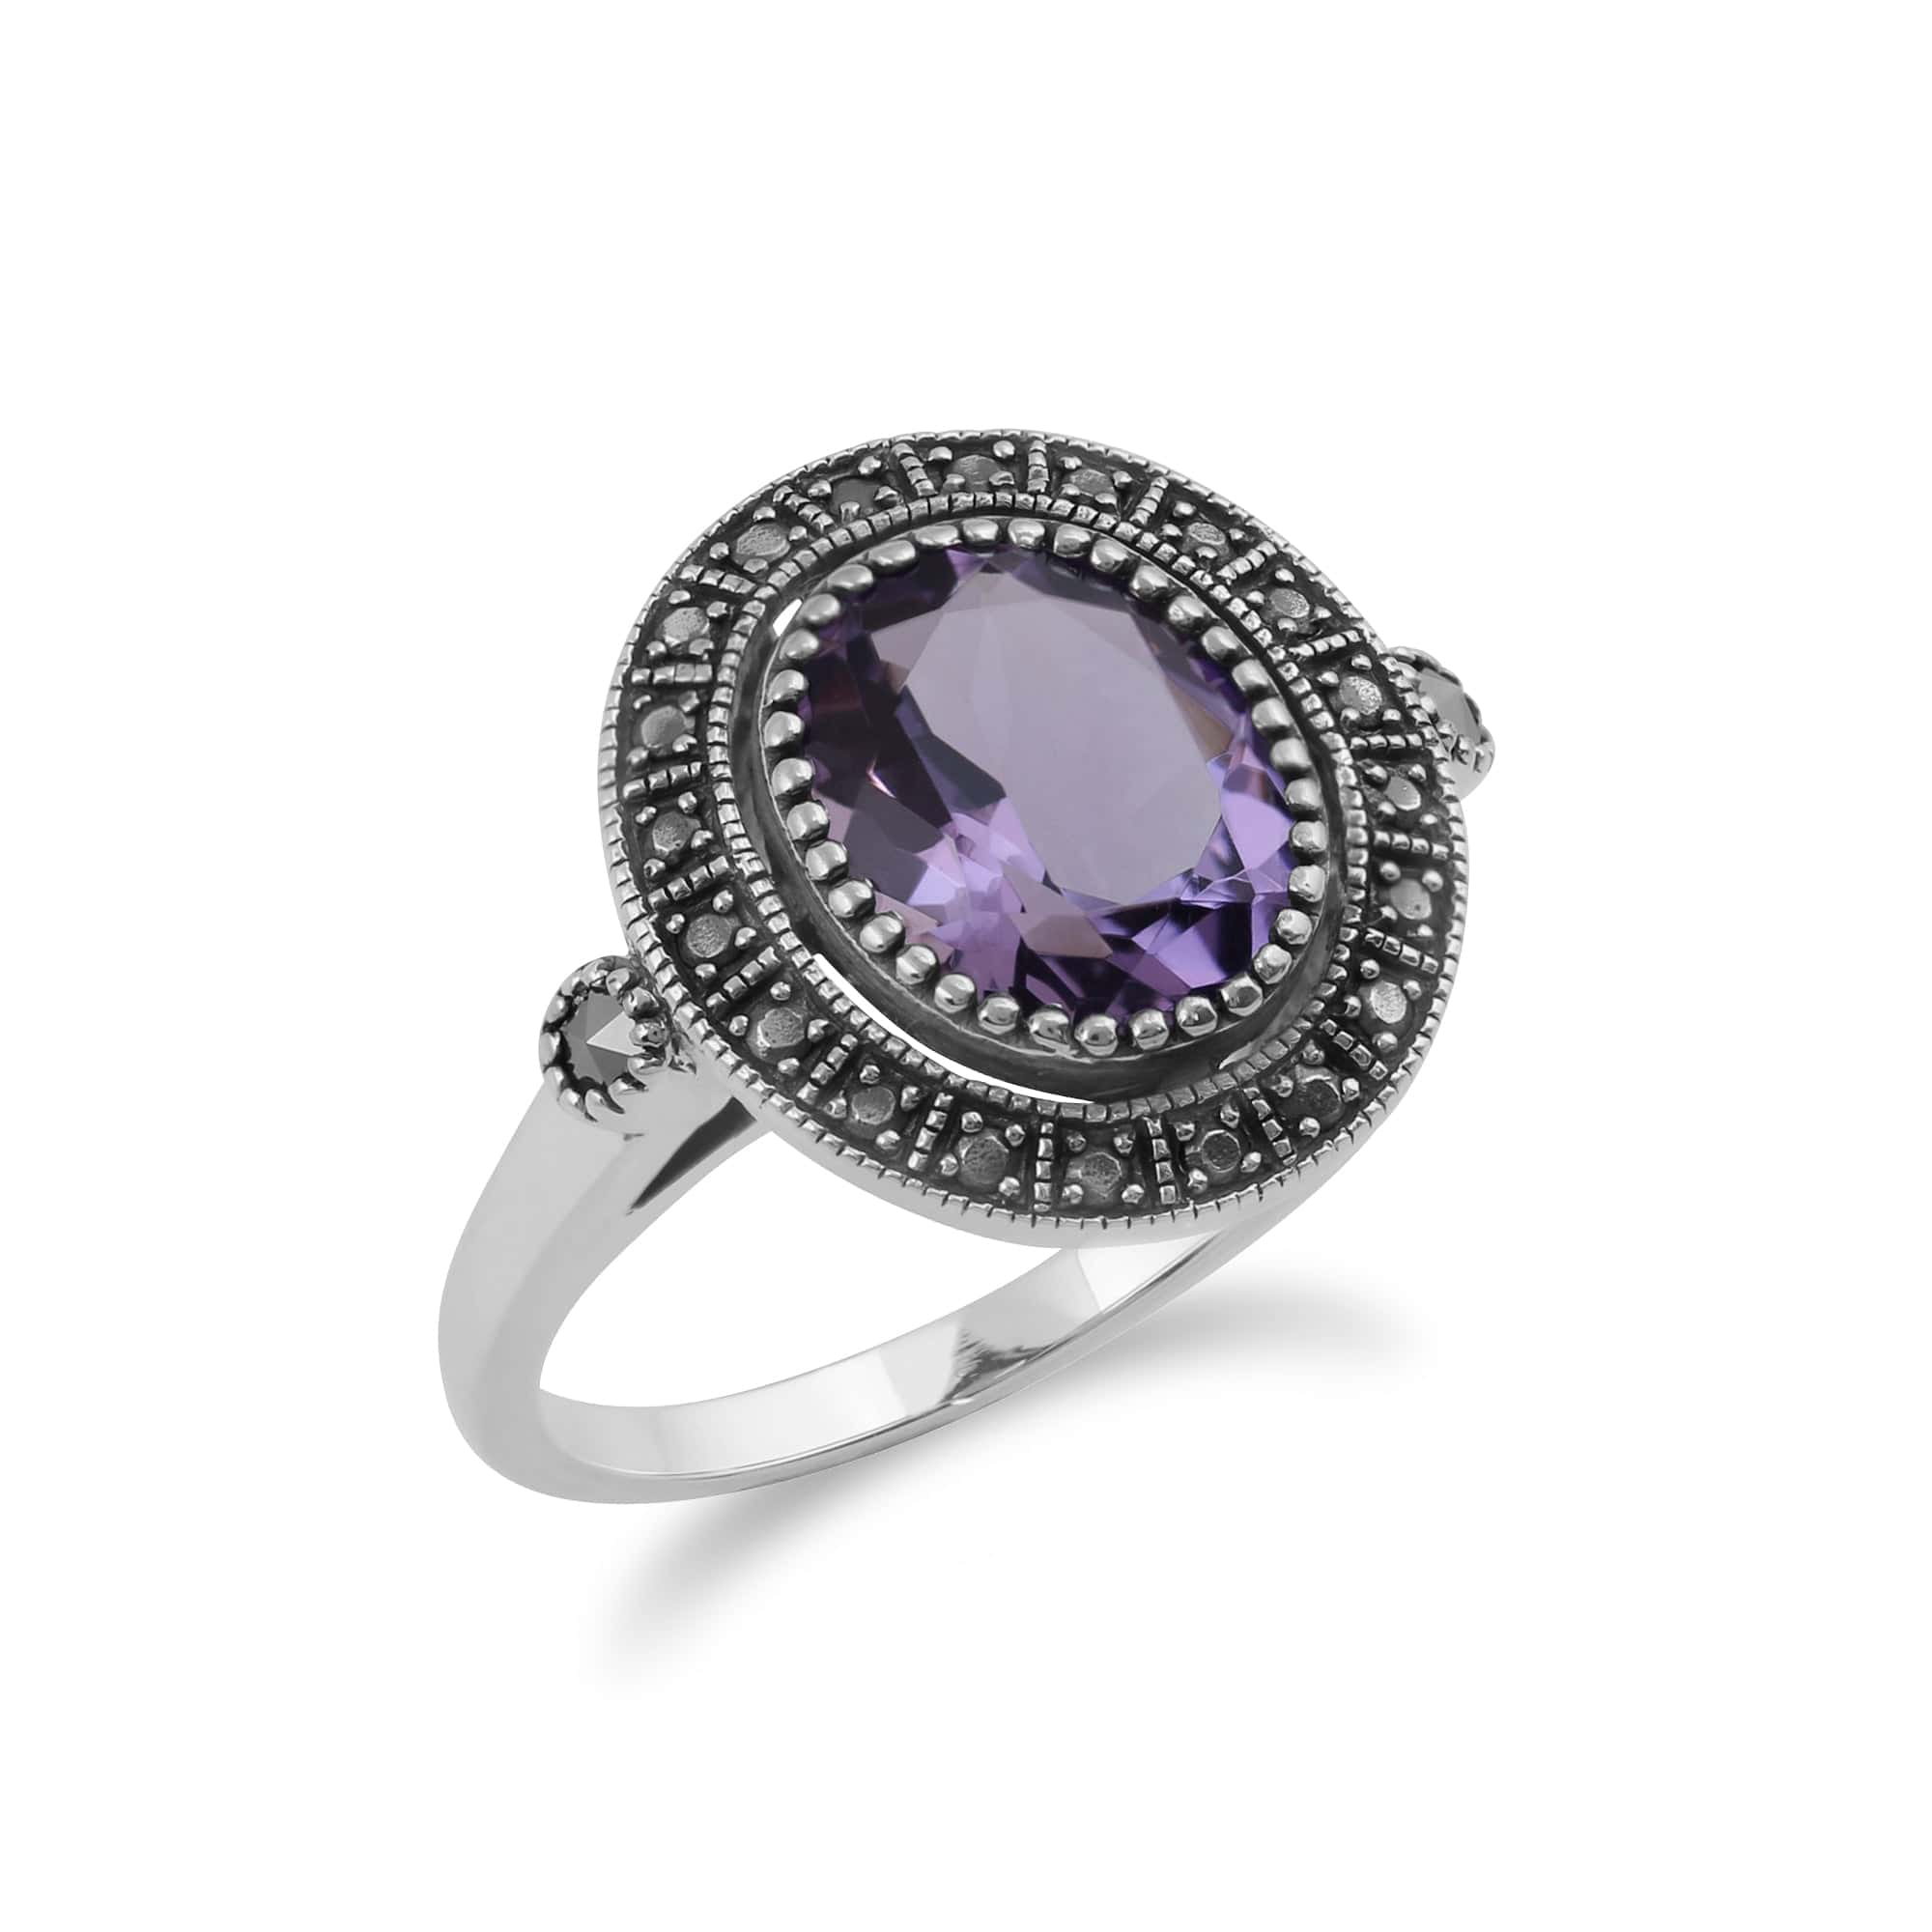 224R029503925 Art Deco Style Oval Amethyst & Marcasite Statement Cocktail Ring in 925 Sterling Silver 2